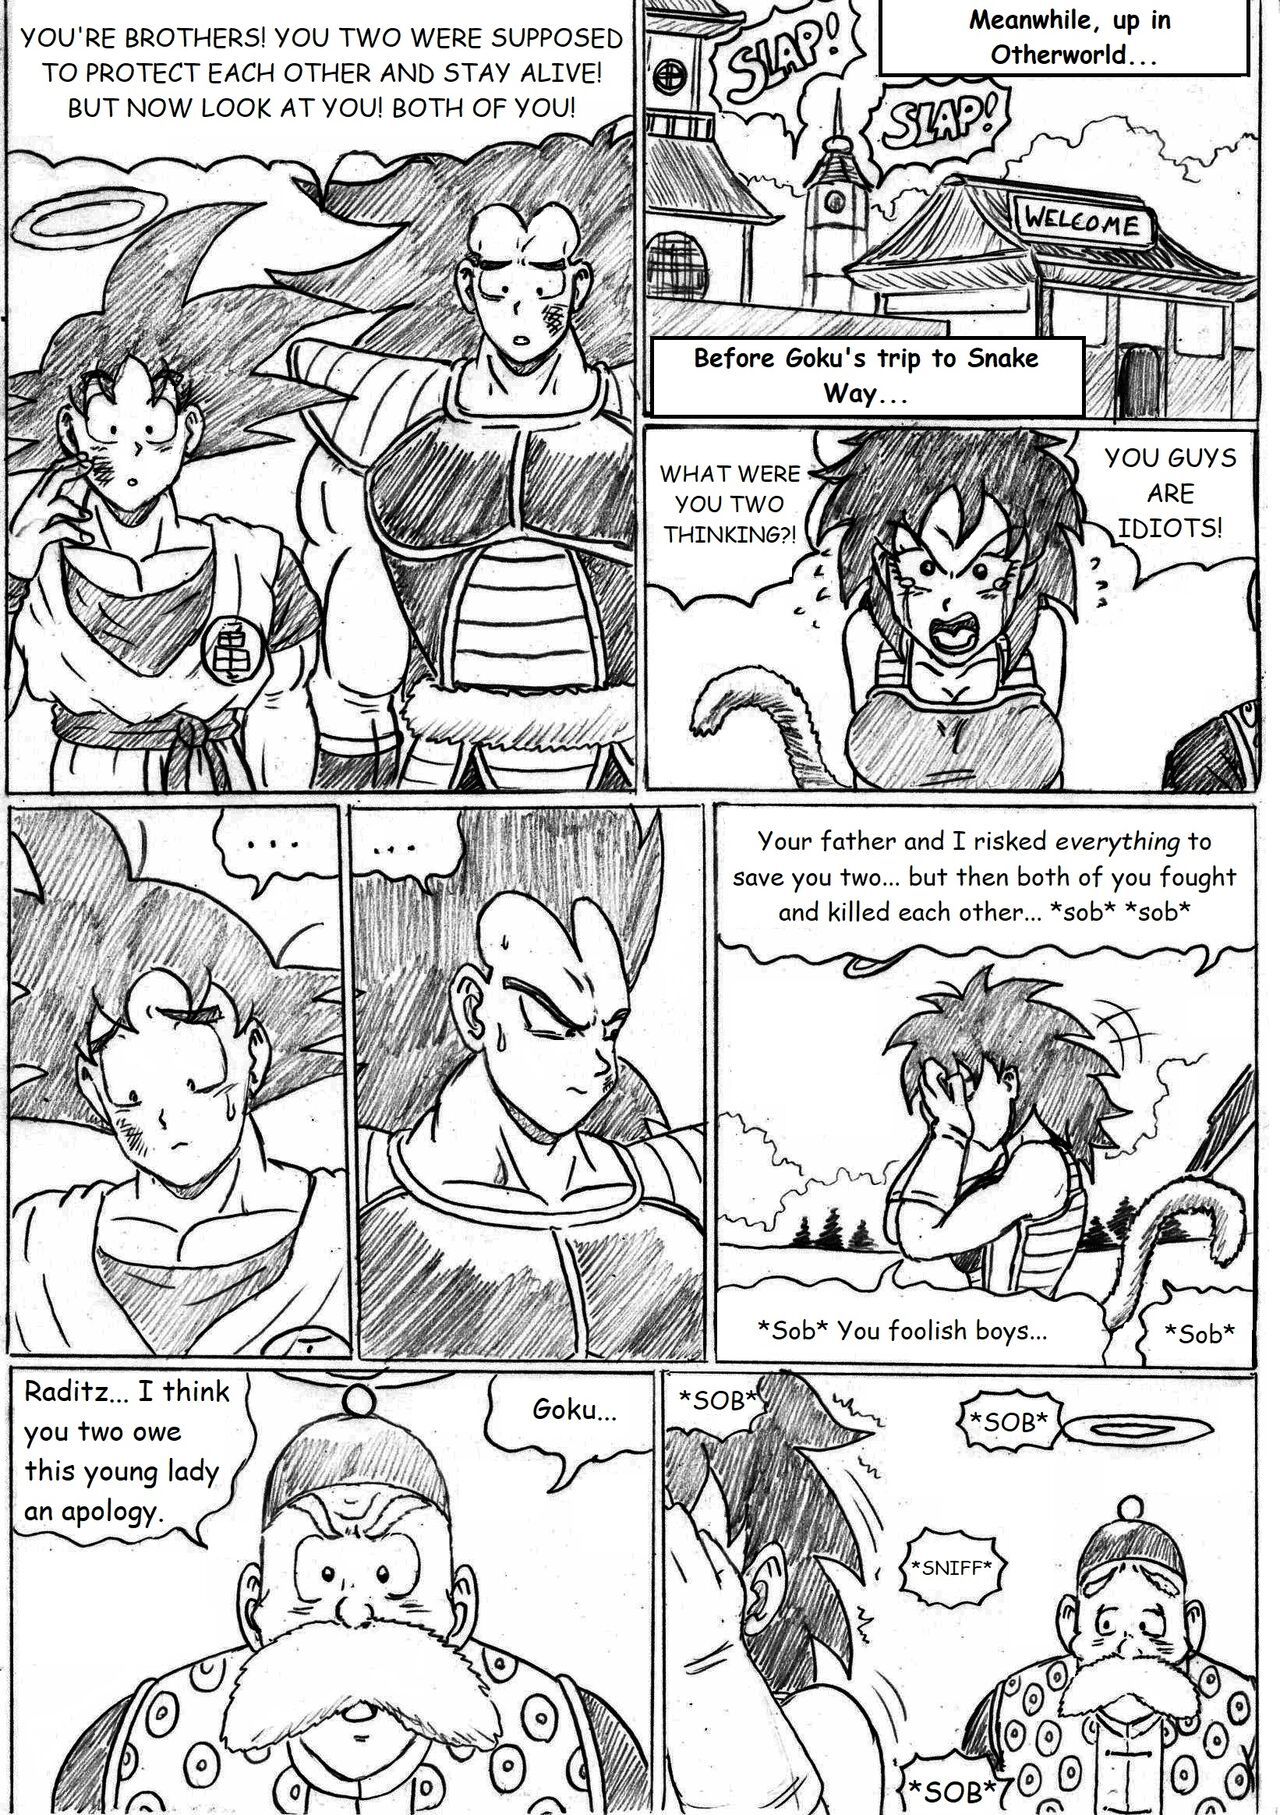 [TheWriteFiction] Dragonball Z Golden Age - Chapter 5 - Teamwork (Ongoing) 5